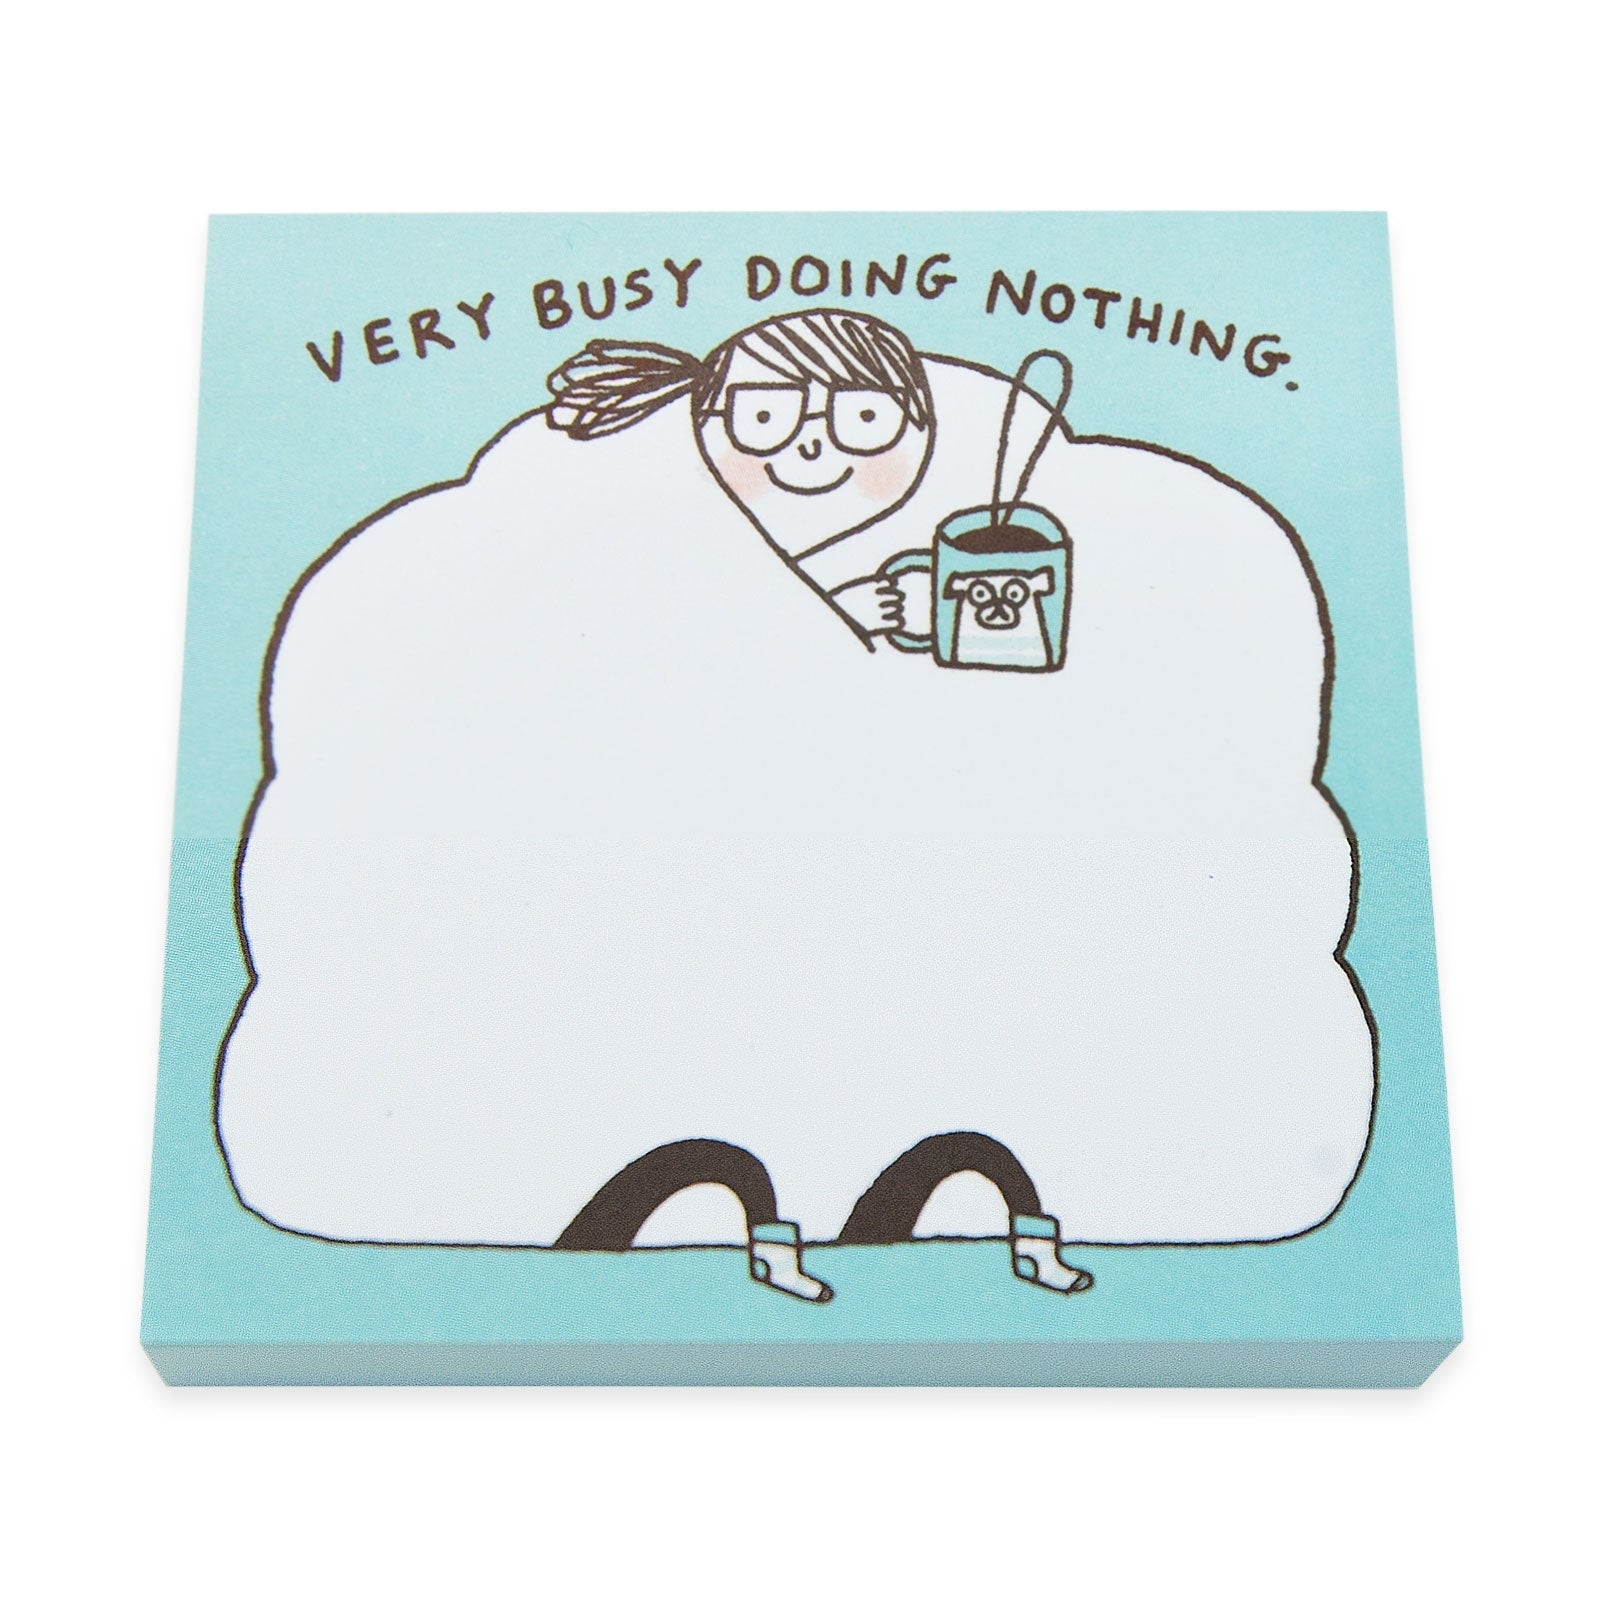 Post-its "Very busy doing nothing" - Fairy Positron